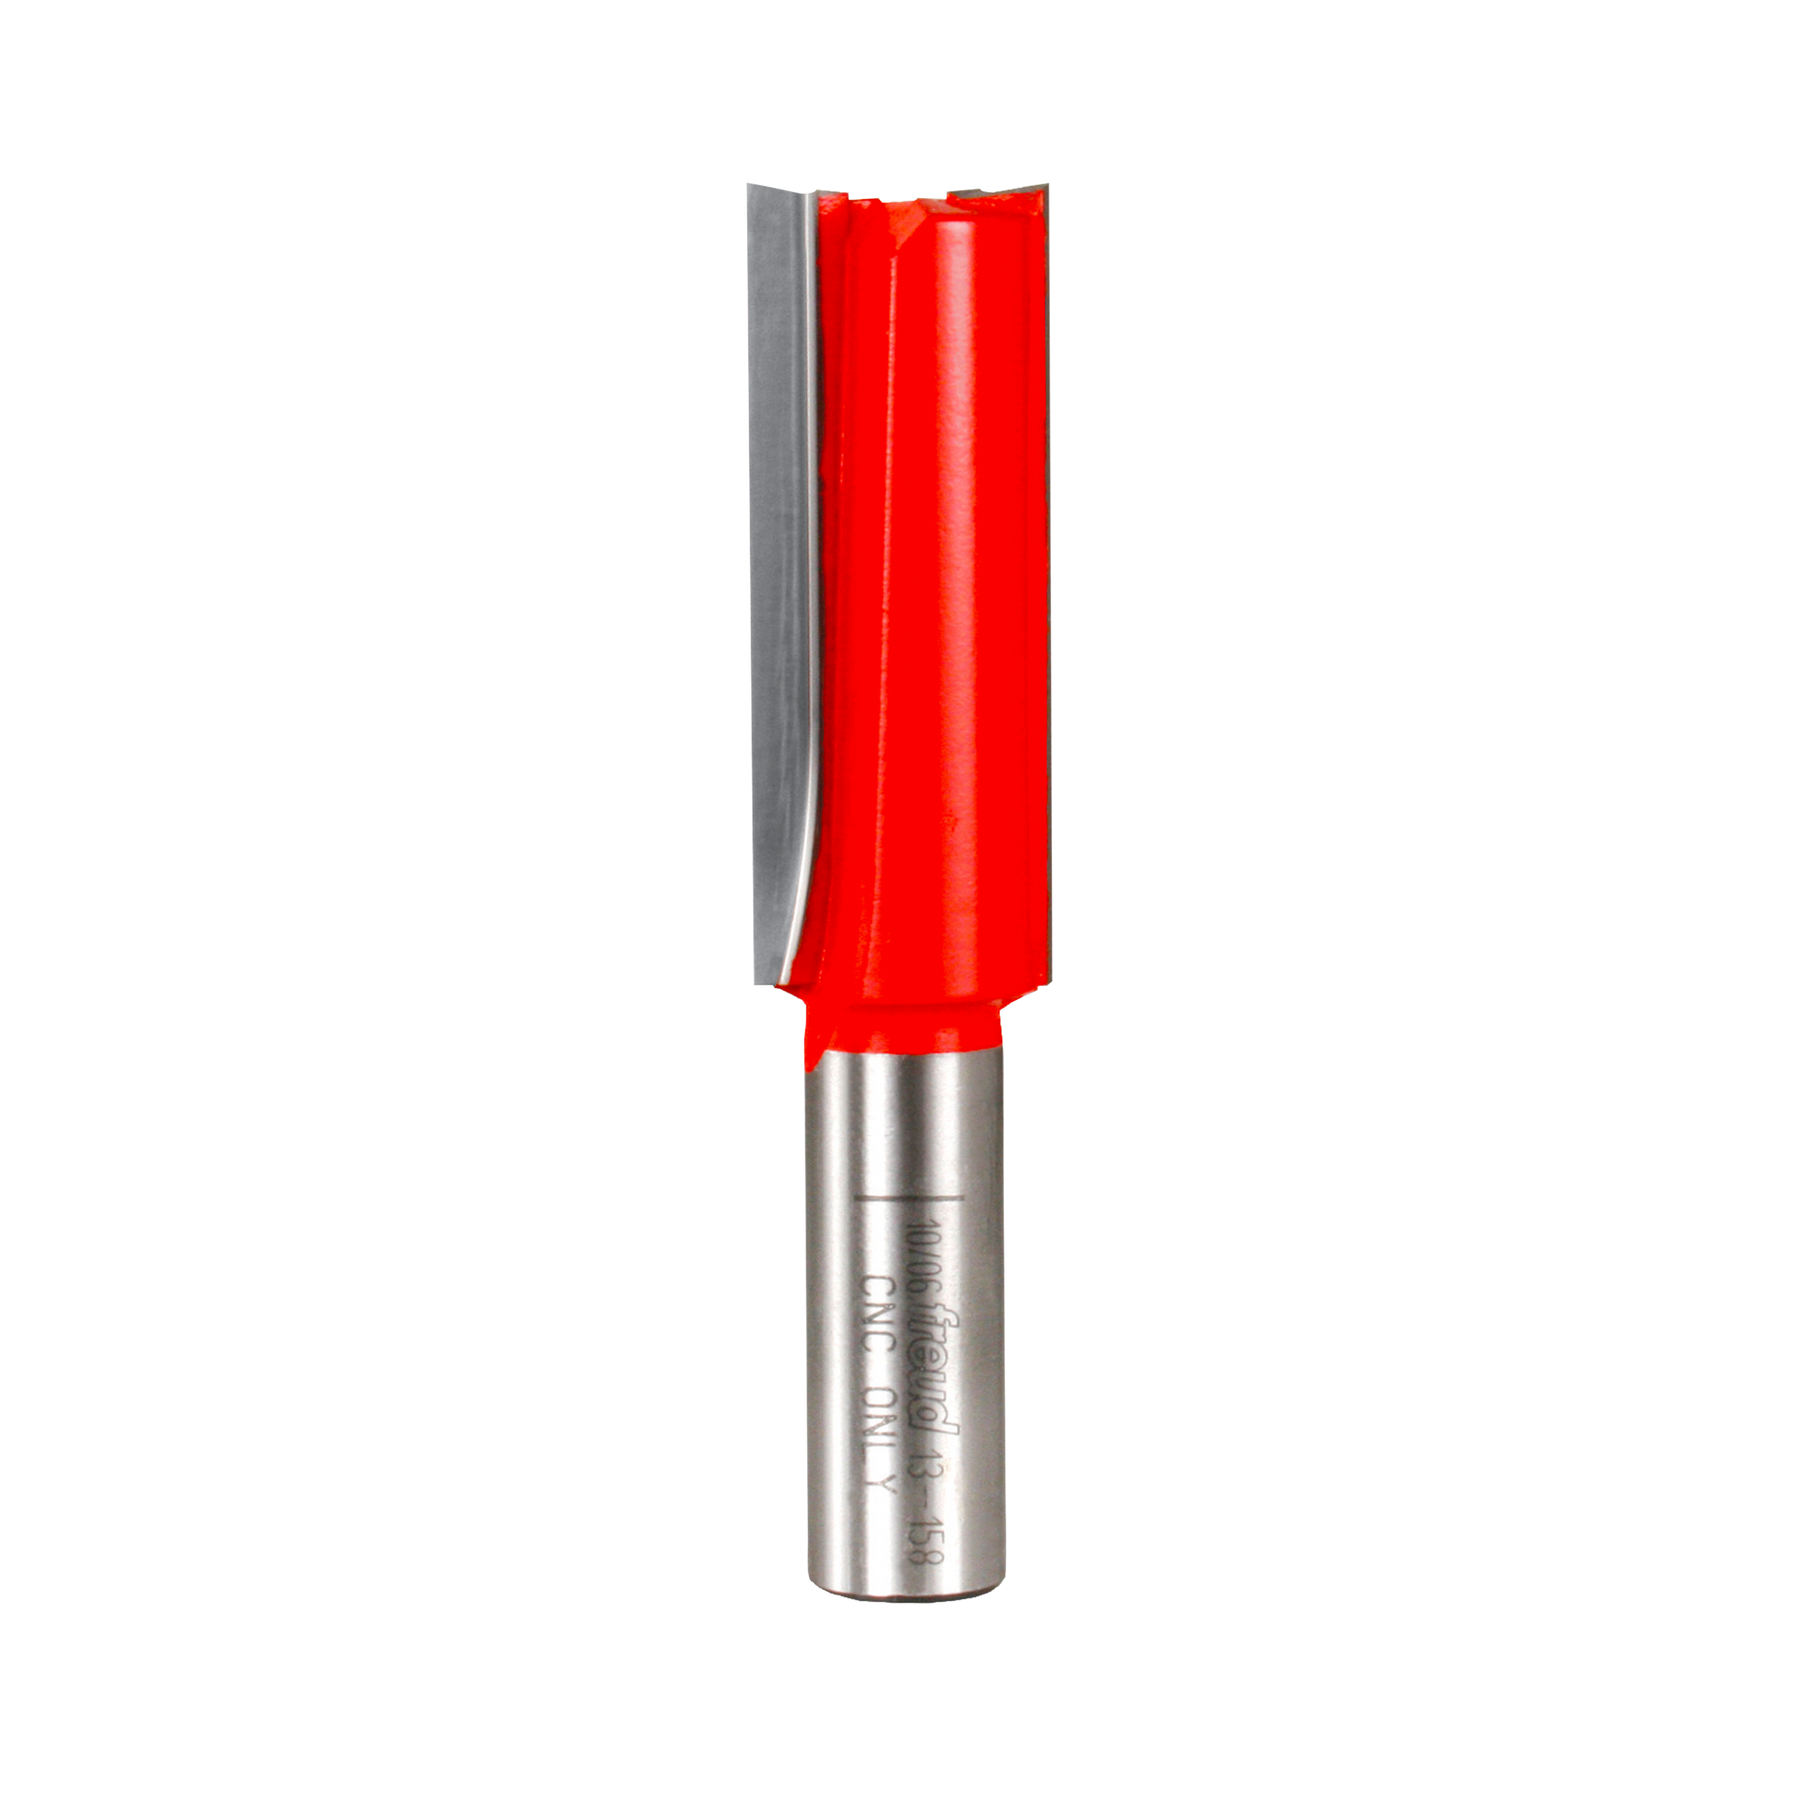 Freud Super Hook Straight Router Bits